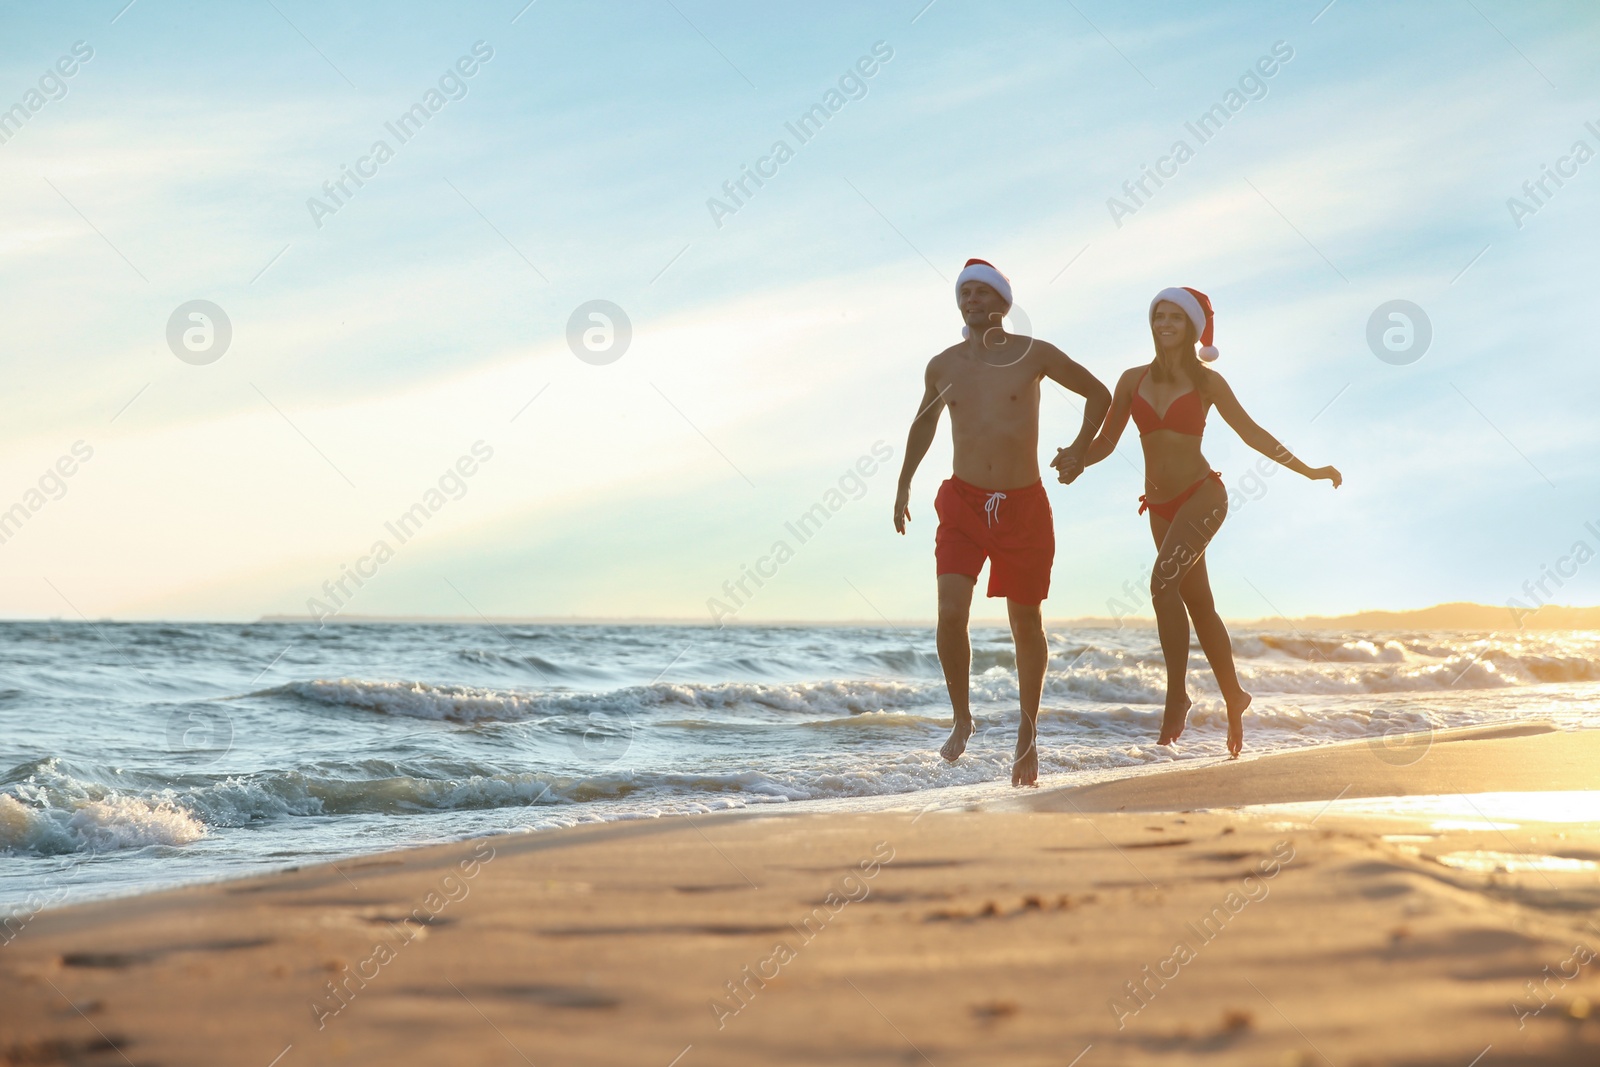 Photo of Happy couple with Santa hats together on beach. Christmas vacation